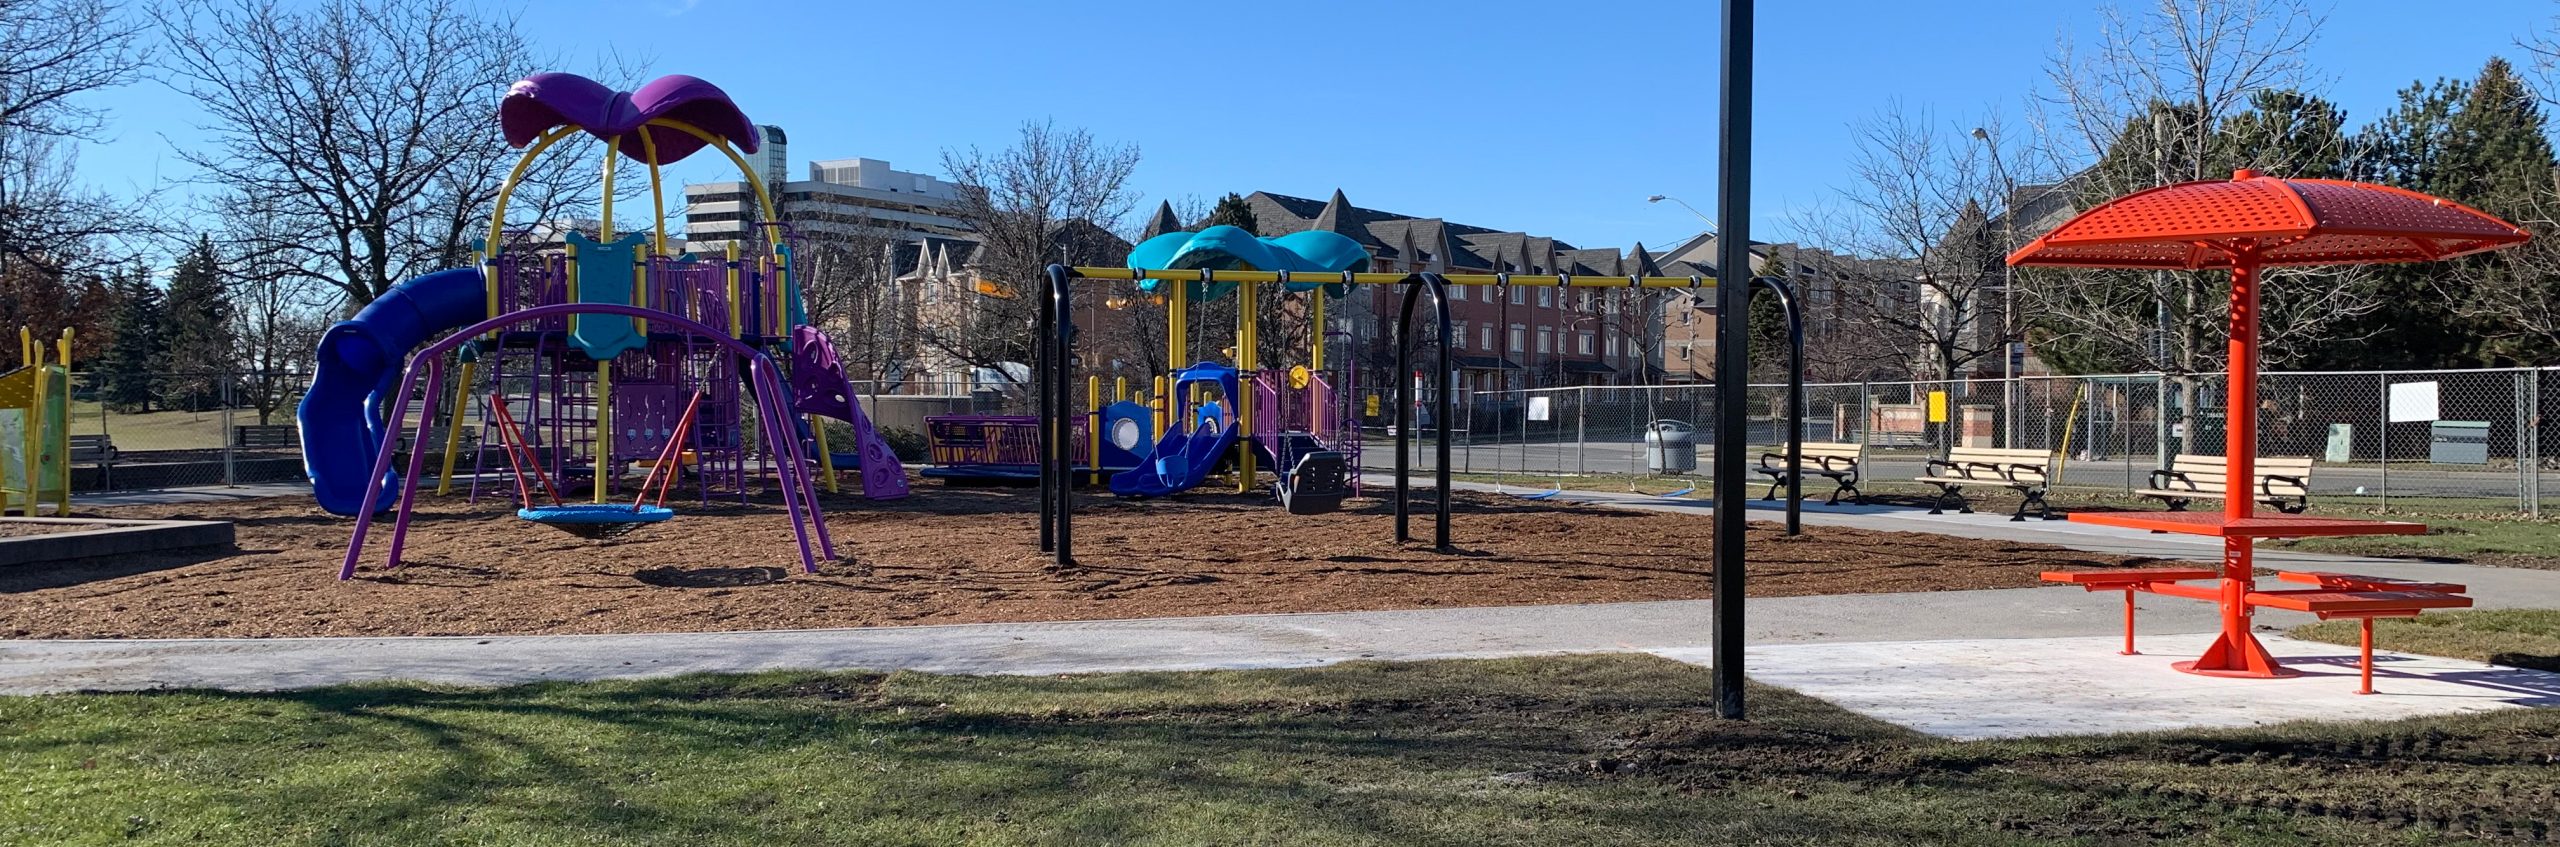 Image shows the new playground which is blue, purple, and yellow. From left to right, there is a basket swing, large senior play structure, swingset, and accessible junior structure with ramp, and an orange umbrella table.